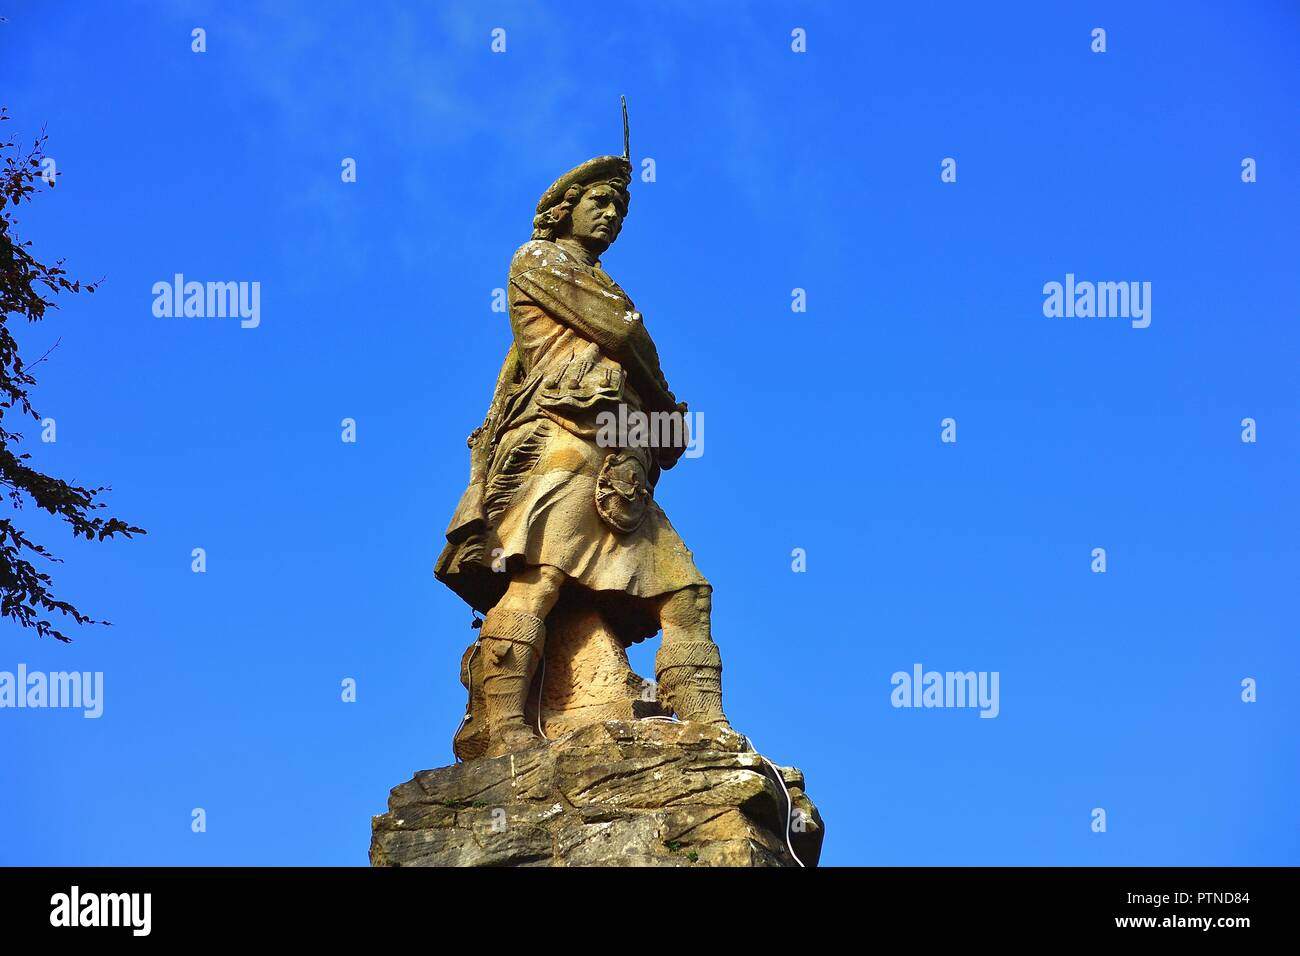 Aberfeldy, Scotland, United Kingdom. Statue atop the Black Watch Memorial dedicated to the 'Highland Watch' or independent guard regiments. Stock Photo